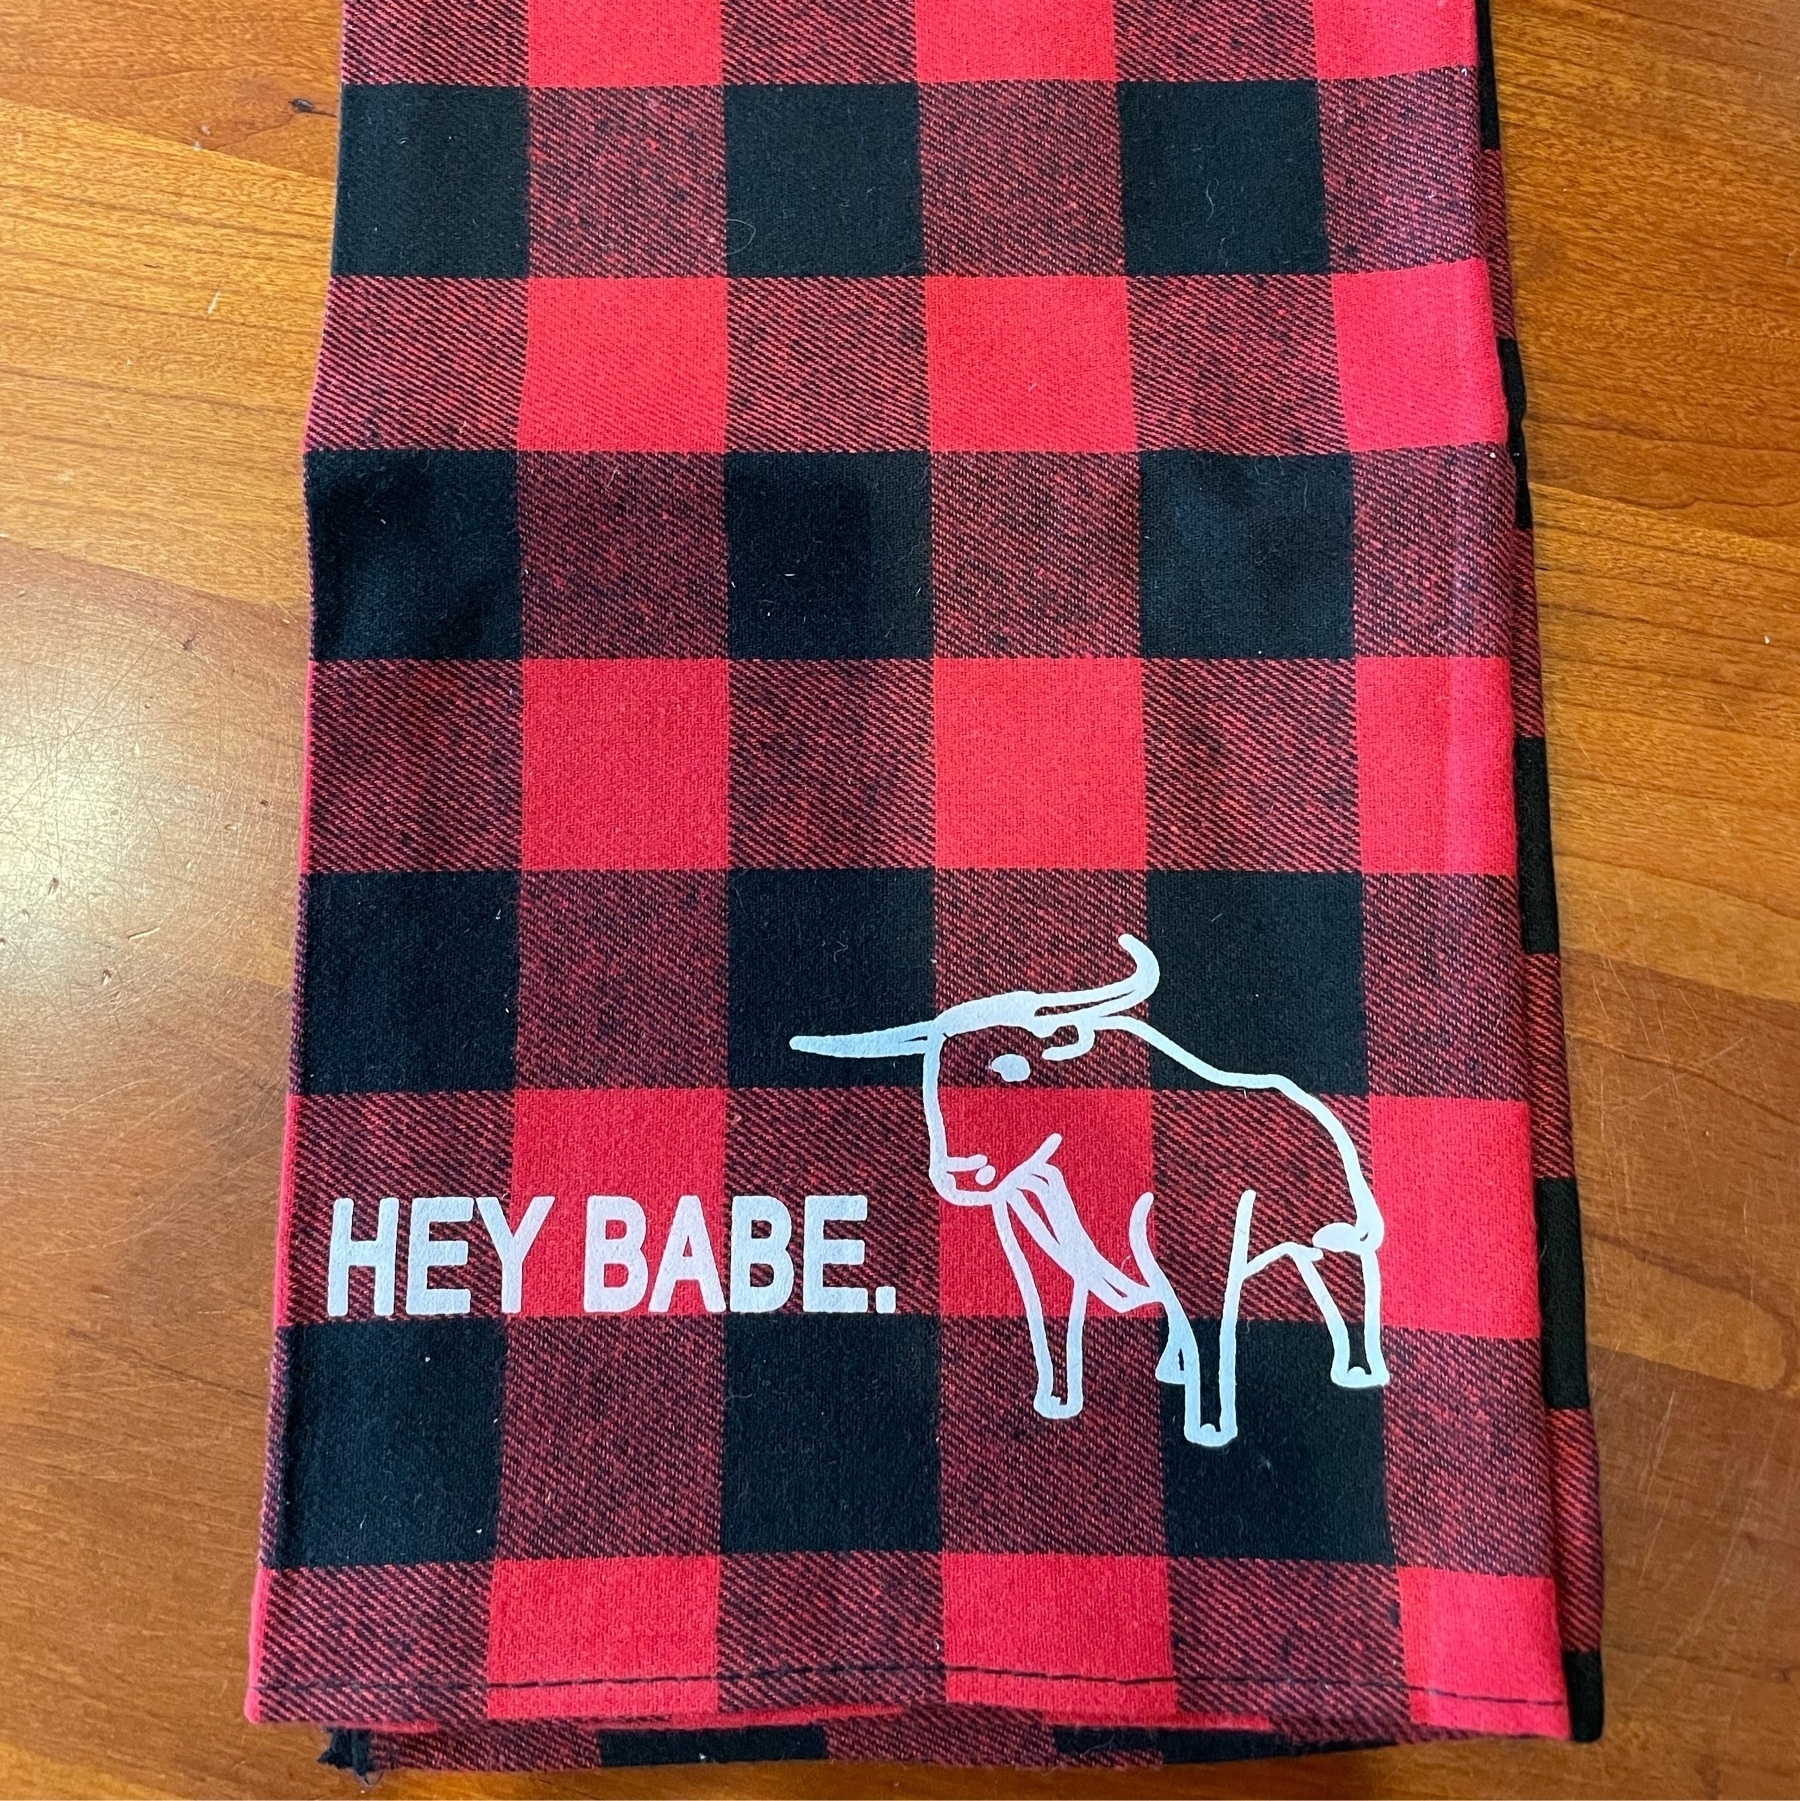 Red-and-black plaid dish towel with text of "Hey Babe" and graphic of Babe the Blue Ox